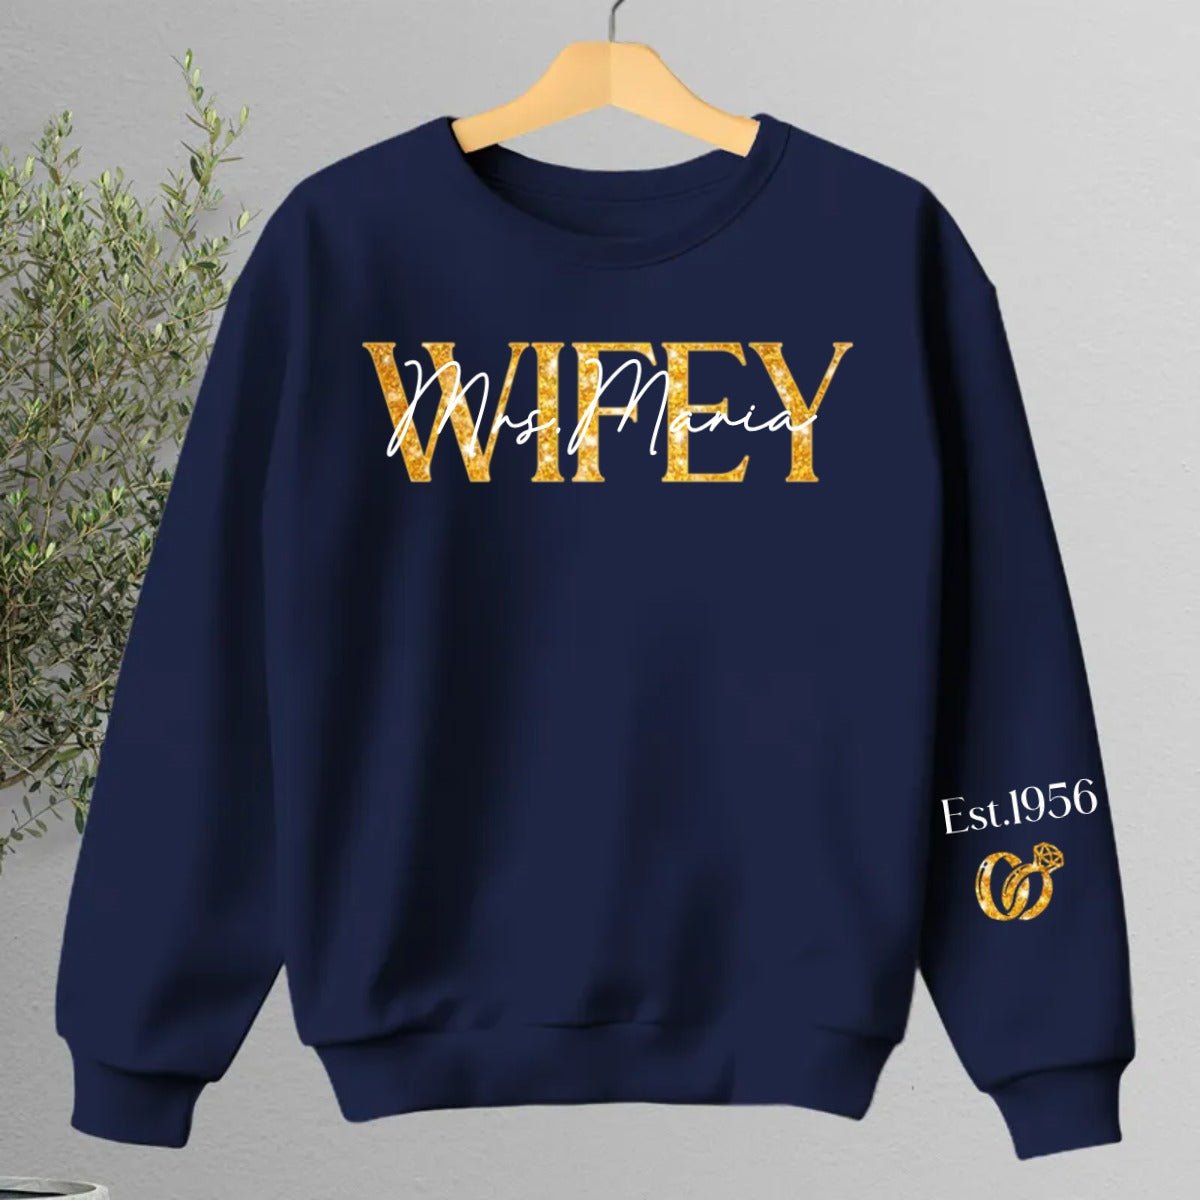 Couple - The Love Of My Life My Wifey - Personalized Sweatshirt - The Next Custom Gift